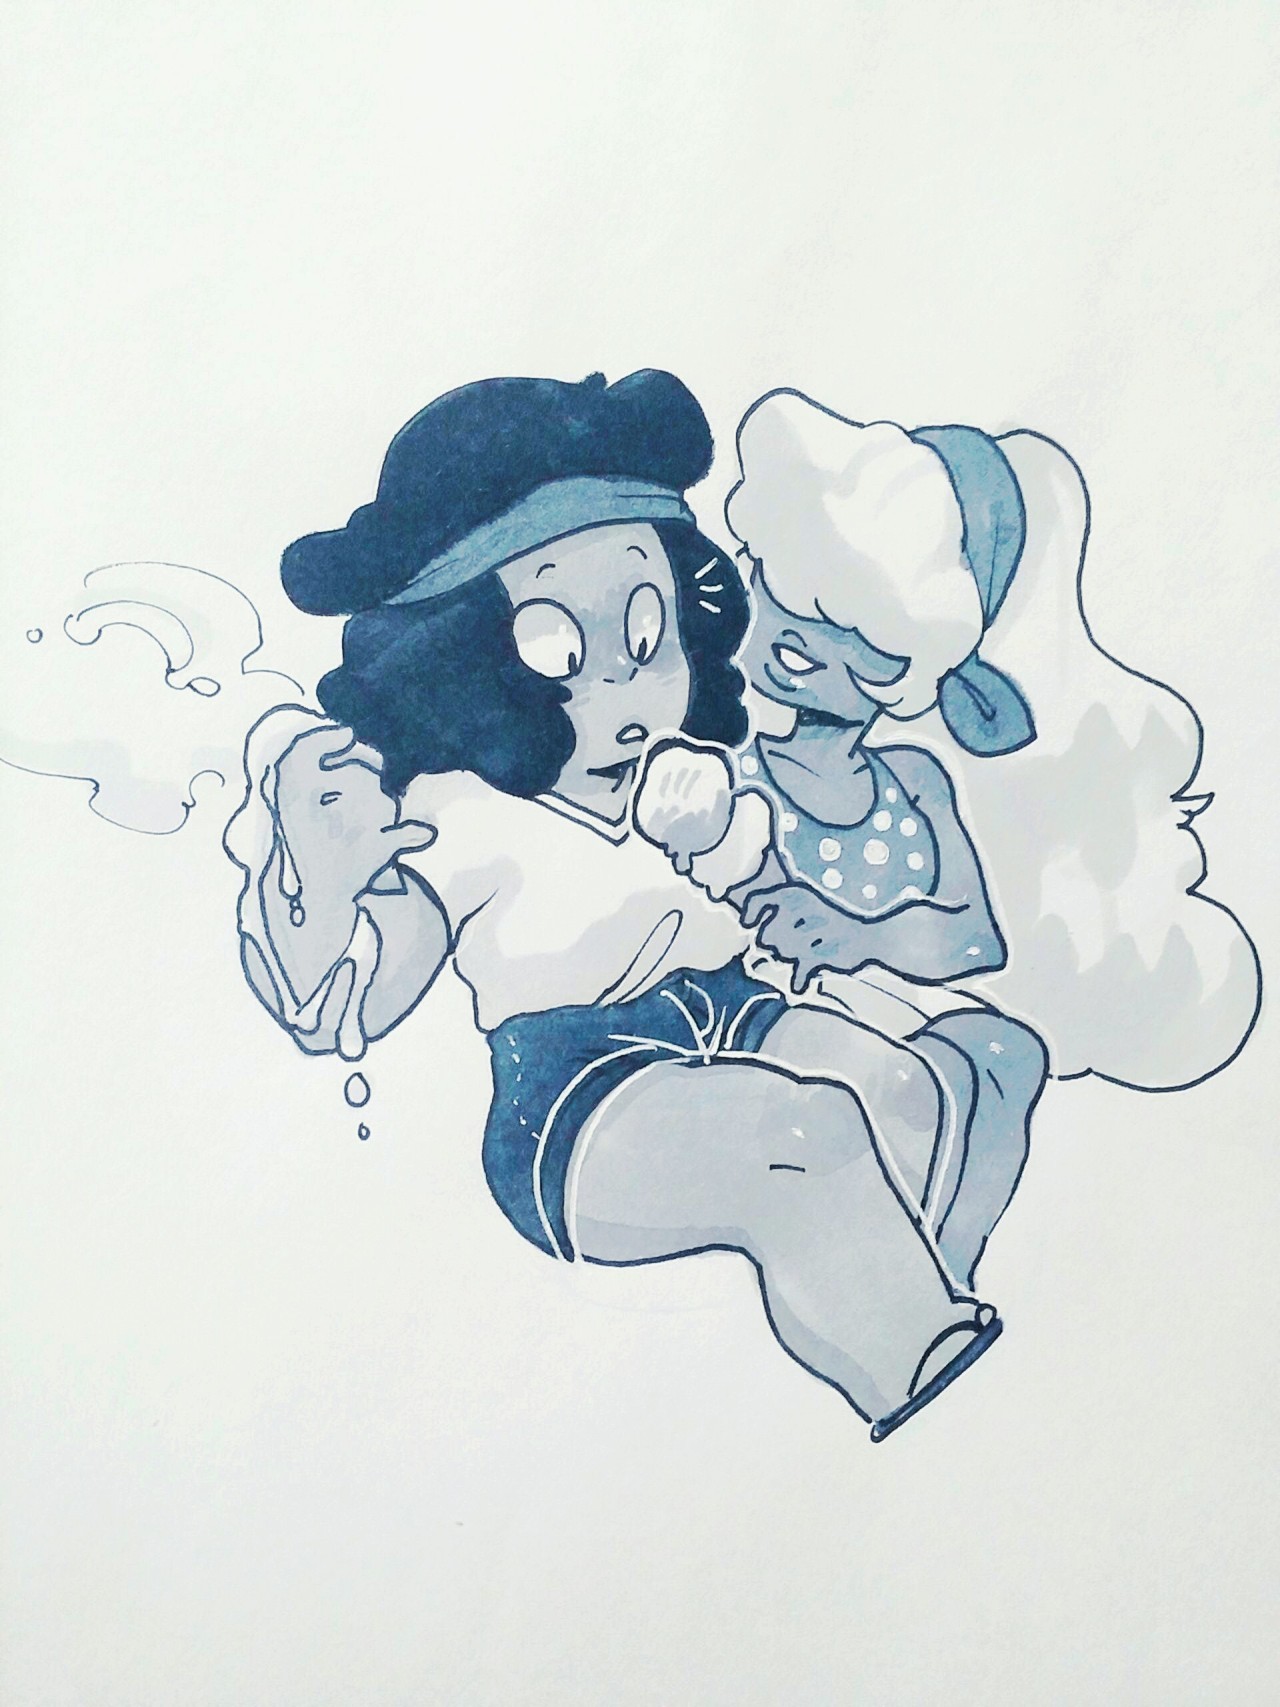 Anonymous said: Could you do a doodle of ruby and sapphire Answer: MY OTP